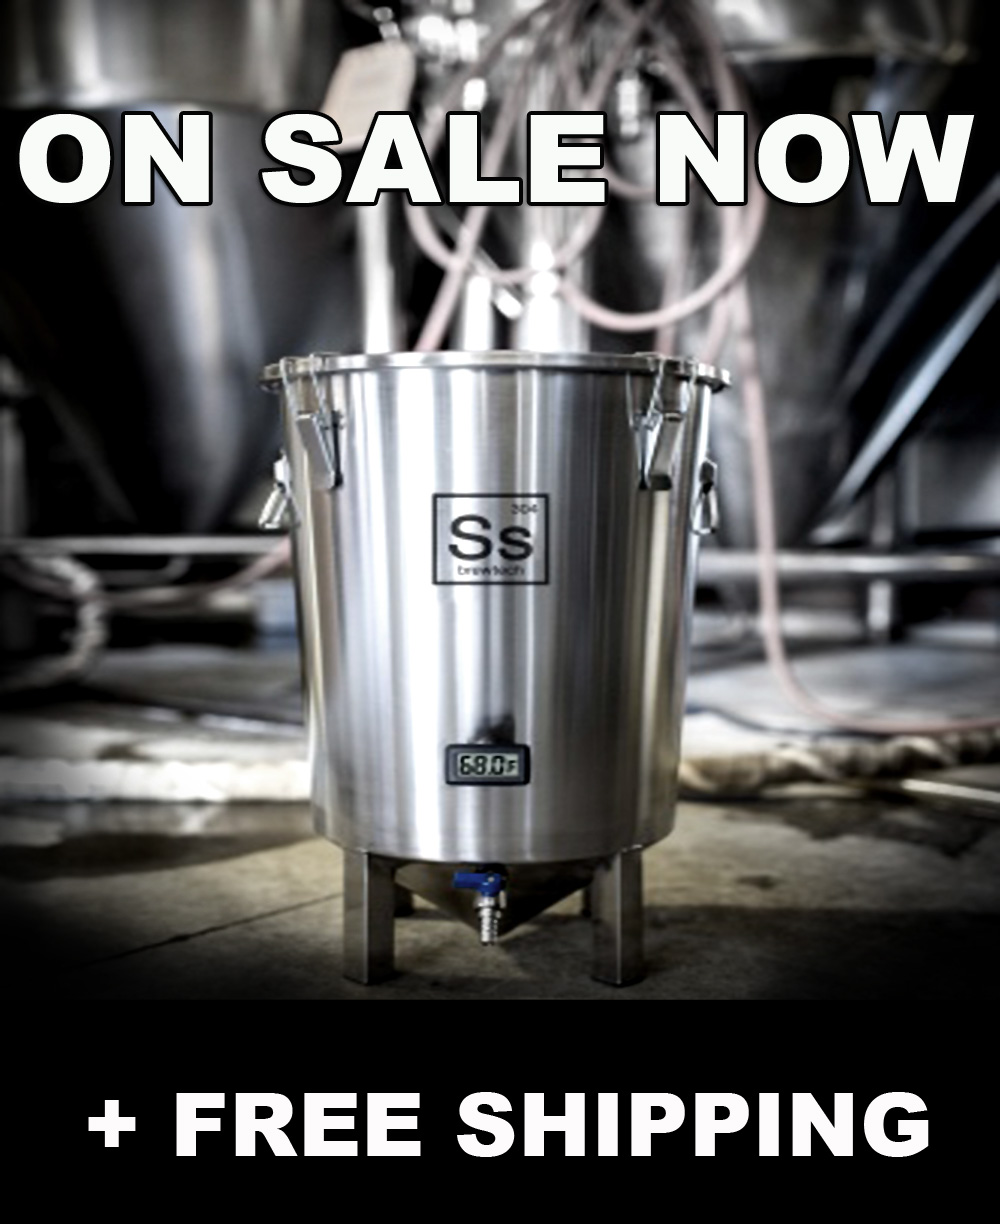 MoreBeer Get A New 7 Gallon Stainless Fermenter for $229 and FREE SHIPPING Coupon Code